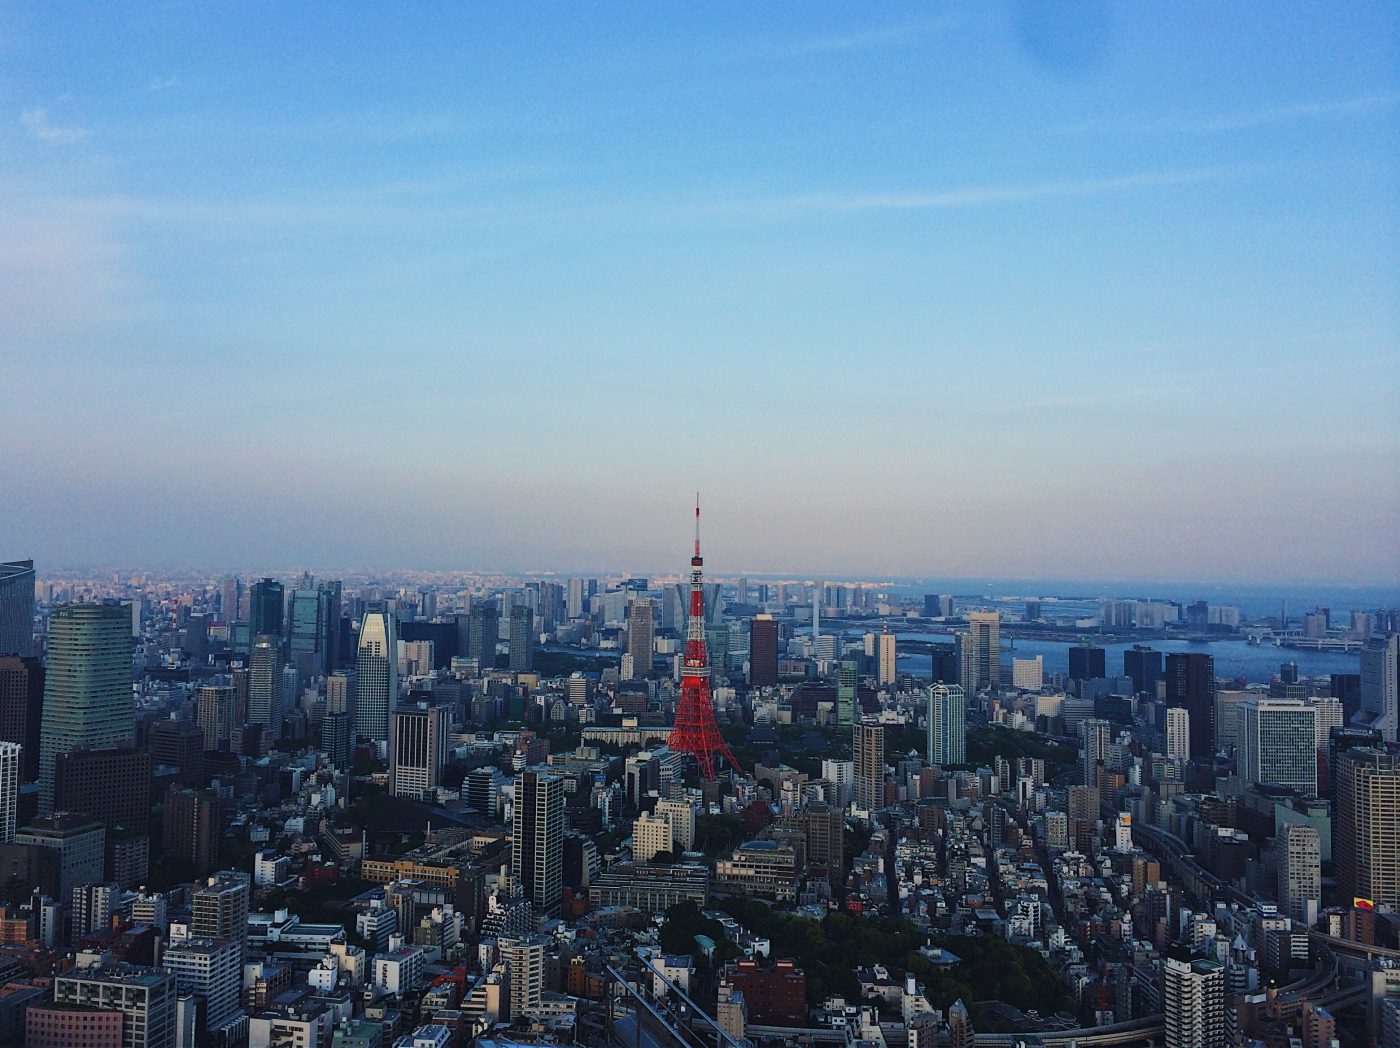 Tokyo Itinerary - Tokyo Tower just before sunset